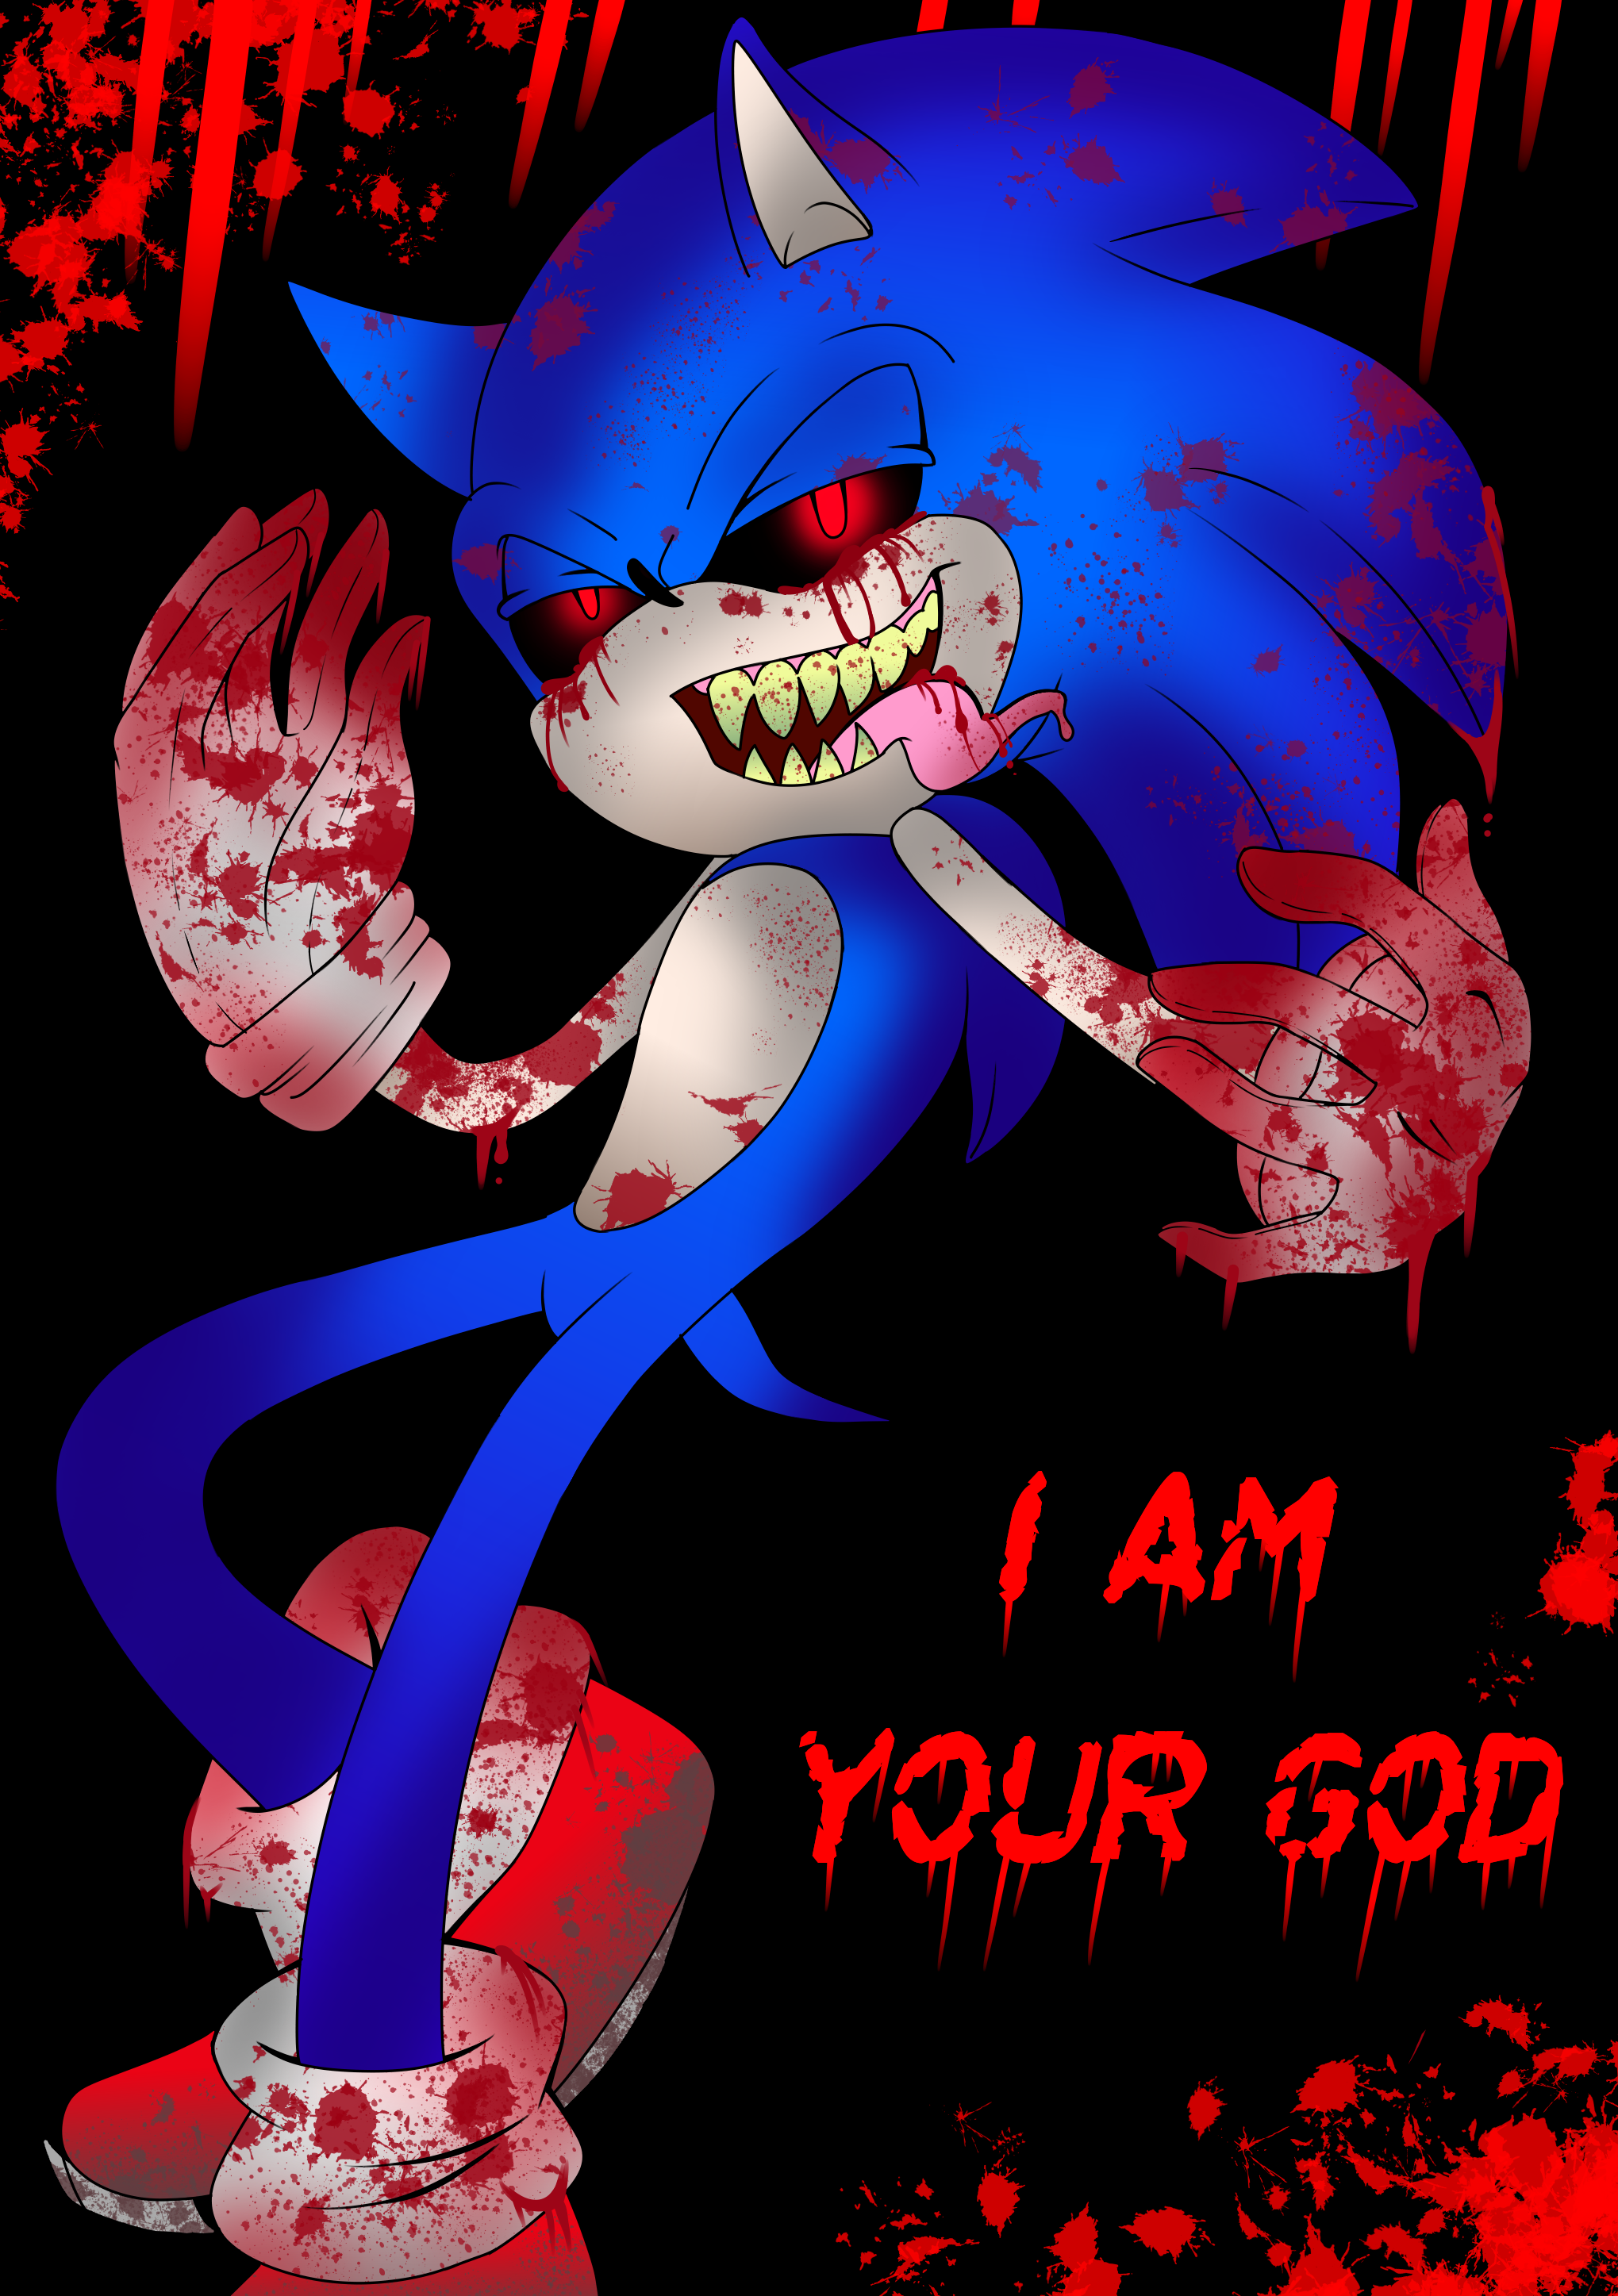 Gore/Fanart] Sonic.EXE One last round - Time is out! : r/DigitalArt